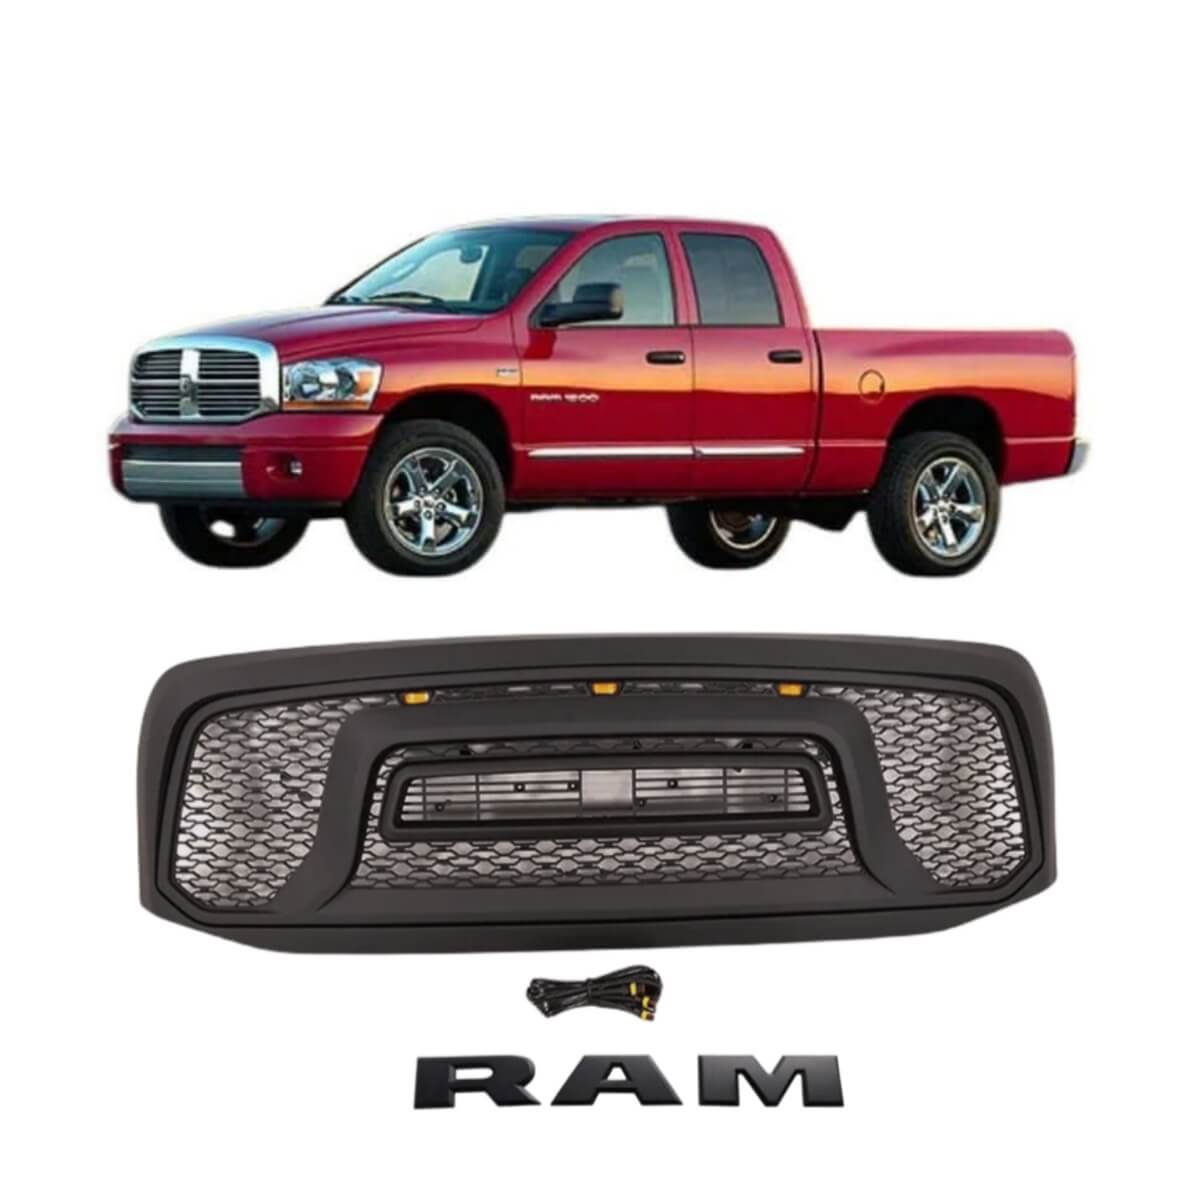 {WildWell}{Dodge Grill}-{Dodge RAM 1500 Grill 2006-2008/1}-Front